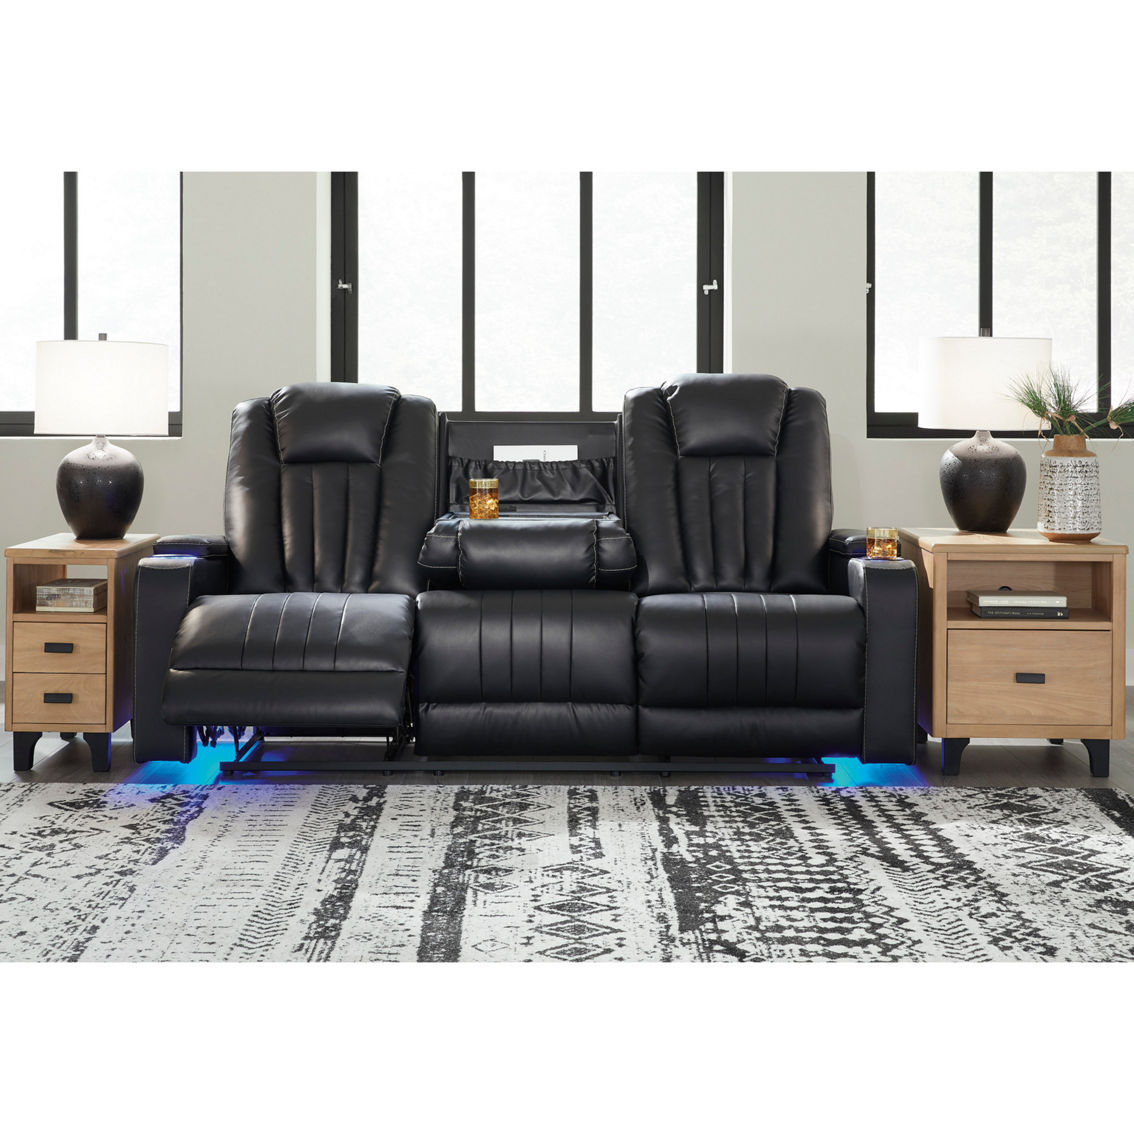 Signature Design by Ashley Center Point Reclining Sofa with Drop Down Table - Image 6 of 10